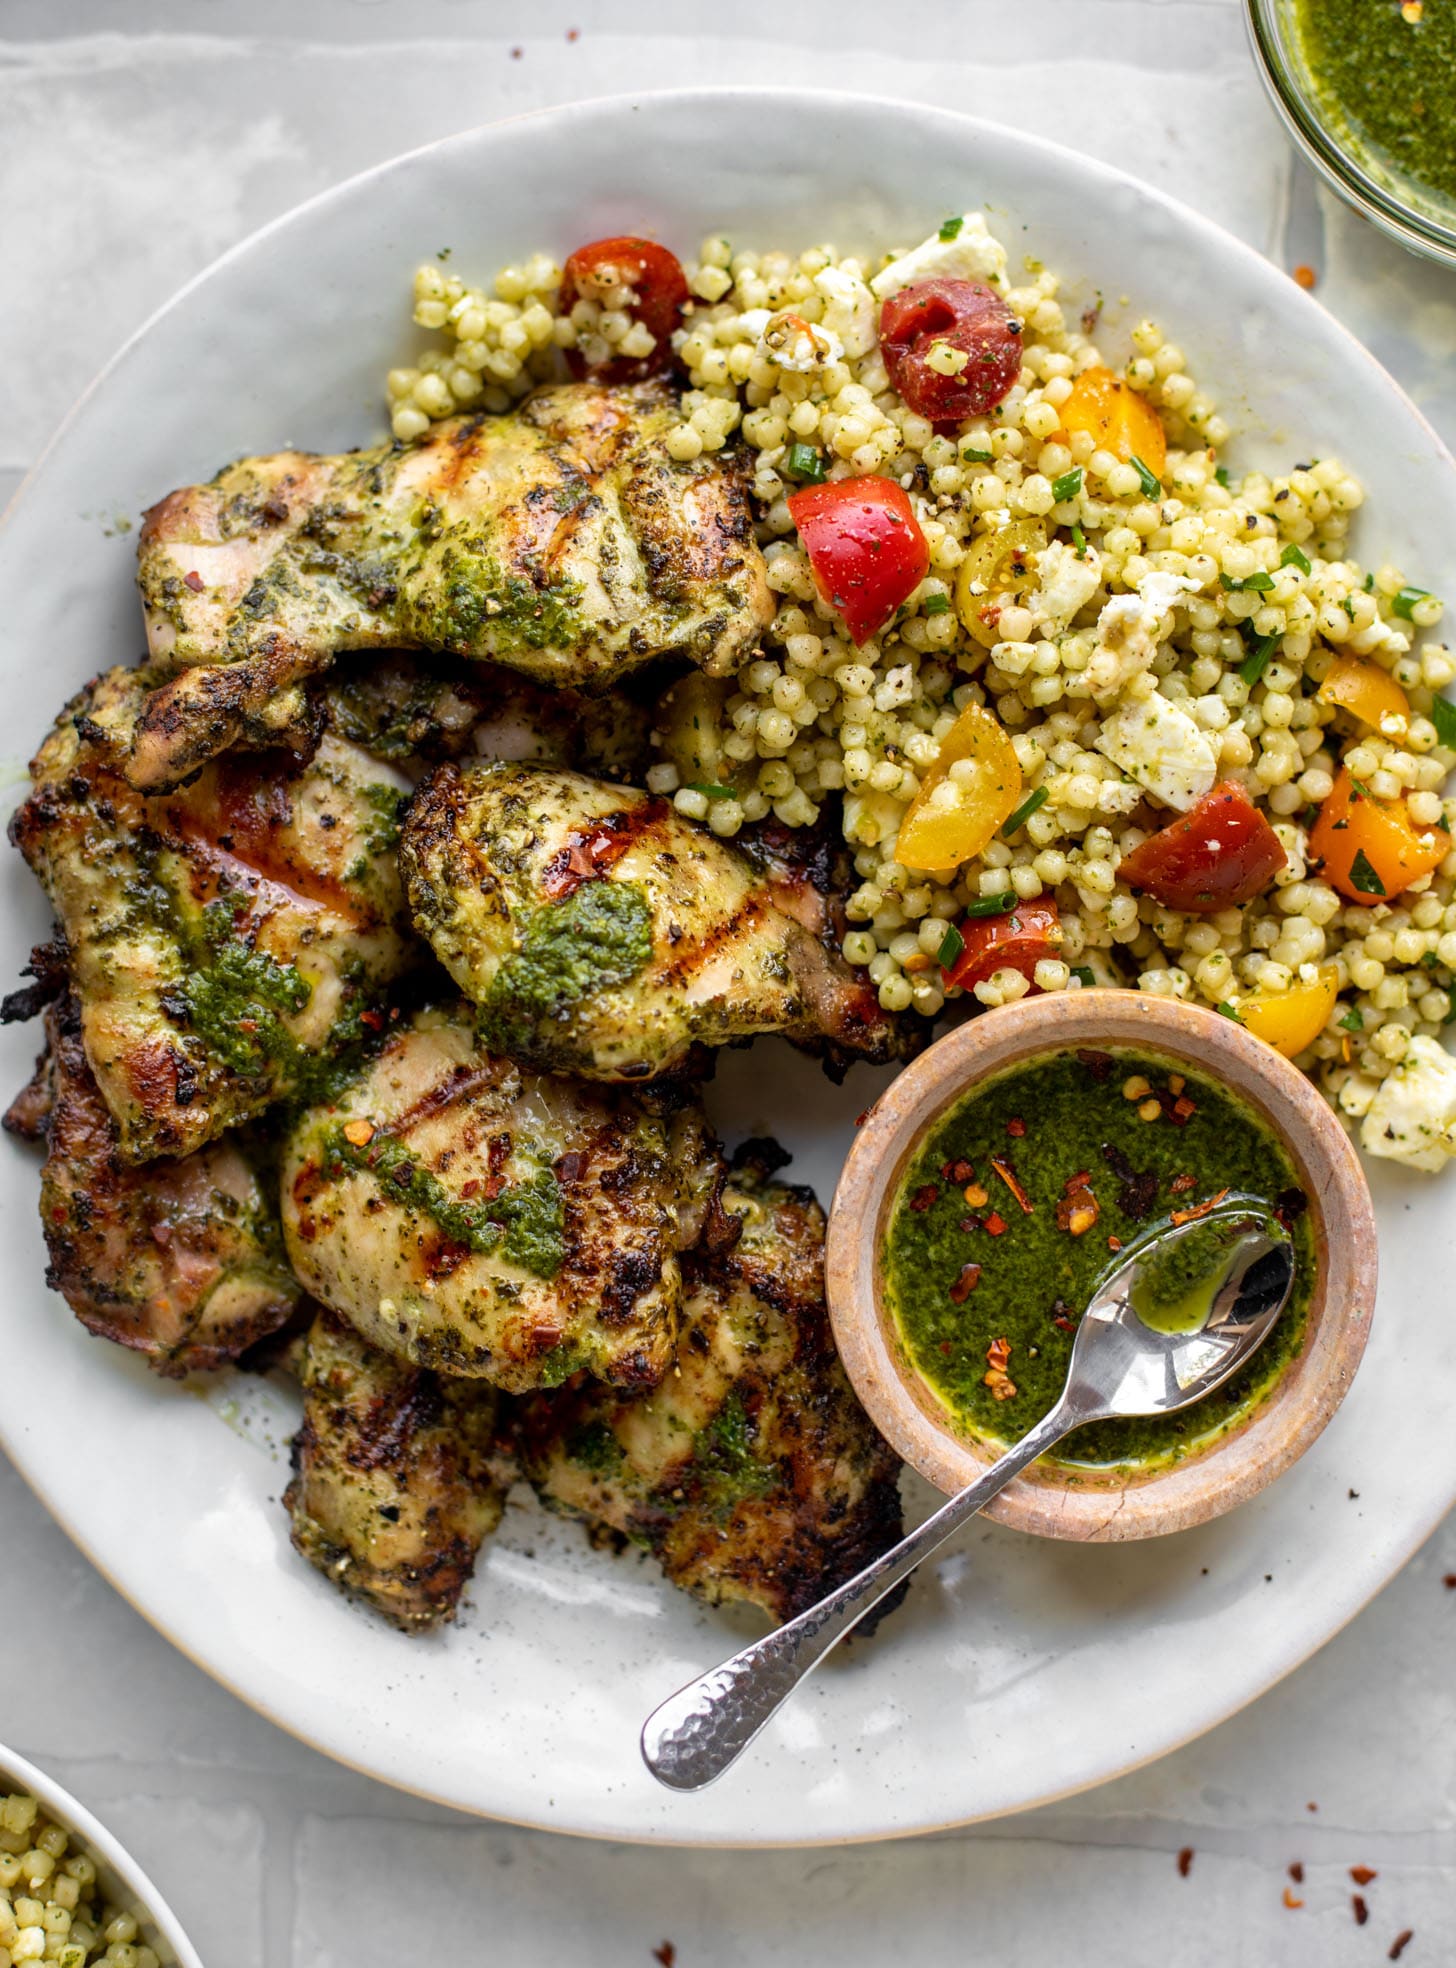 chimichurri grilled chicken with couscous salad